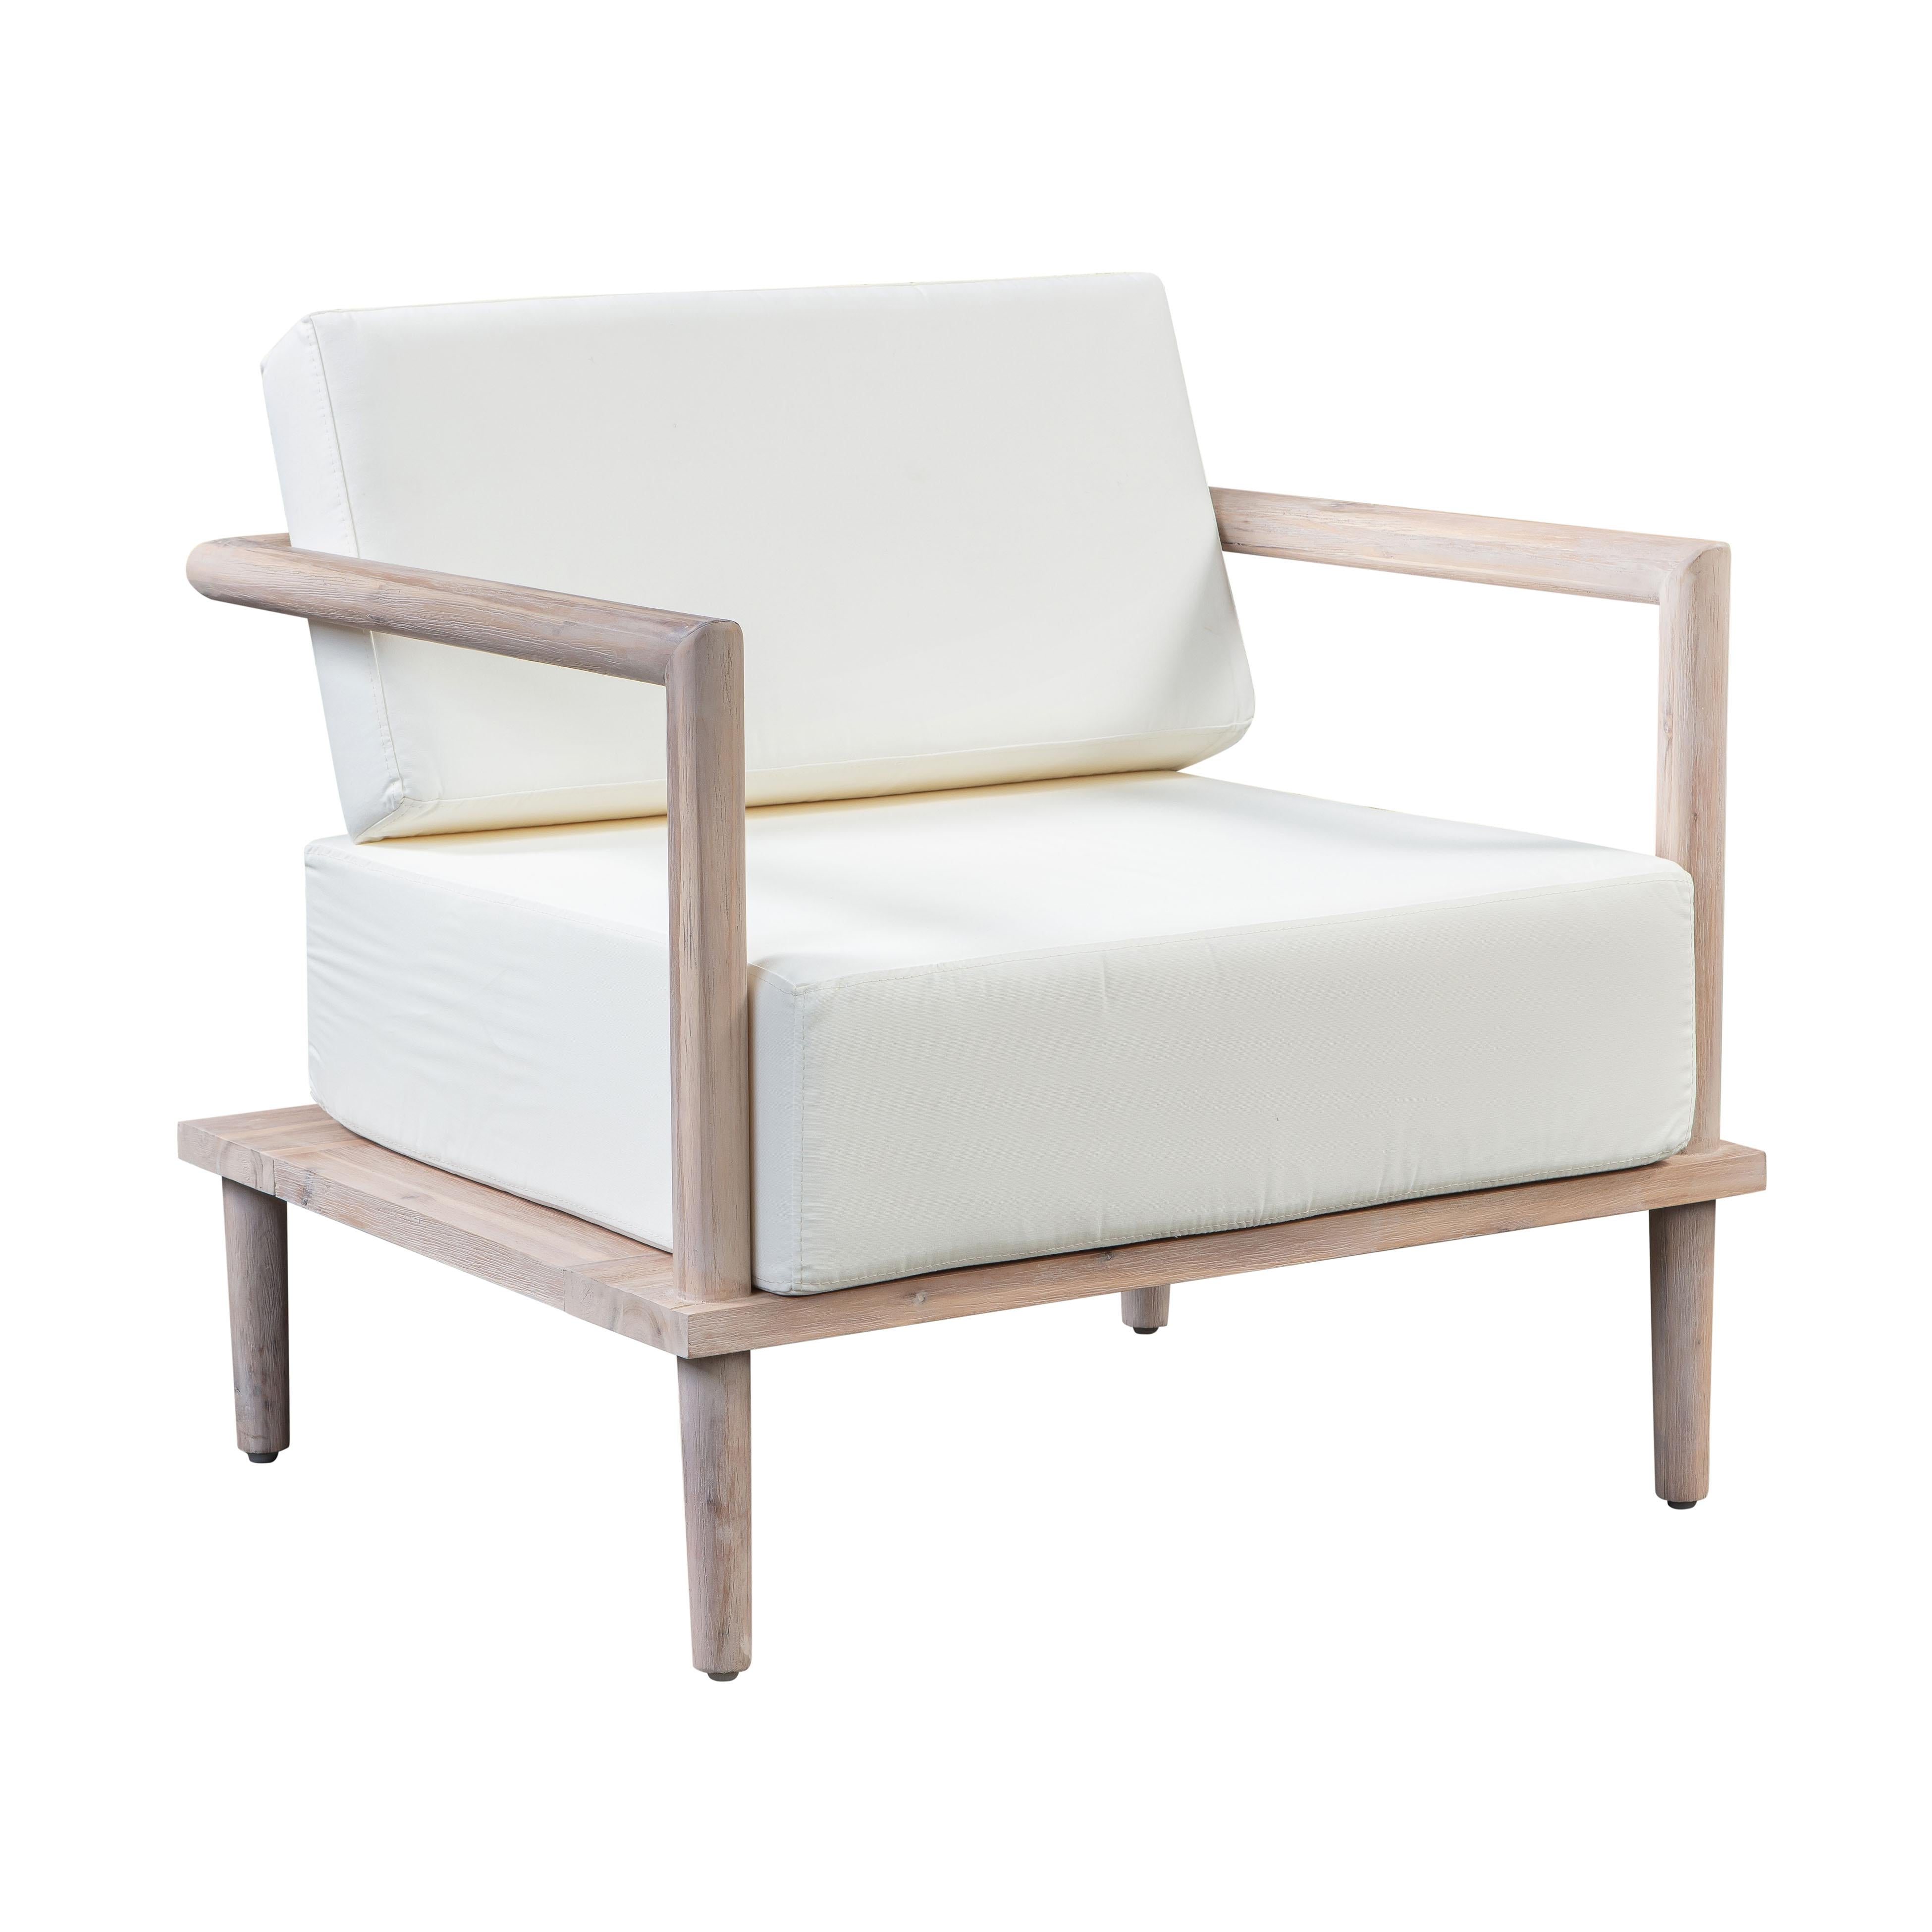 Tov Furniture Accent Chairs - Emerson Cream Outdoor Lounge Chair